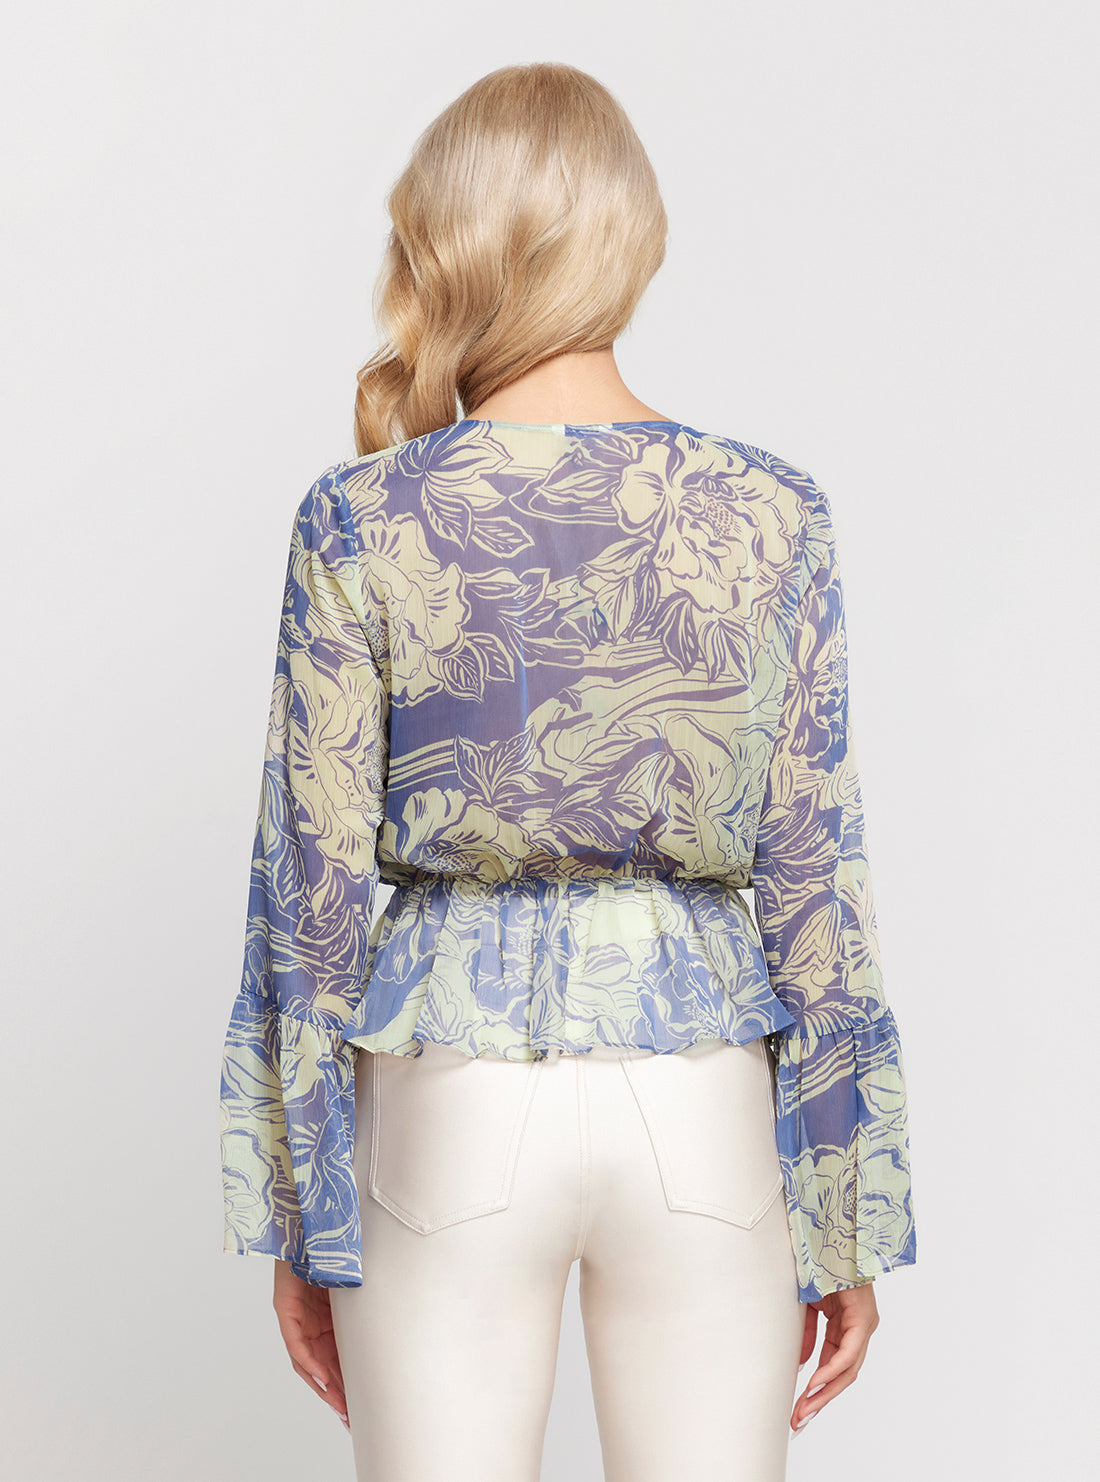 GUESS Blue Floral Print Long Sleeve Demi Top back view